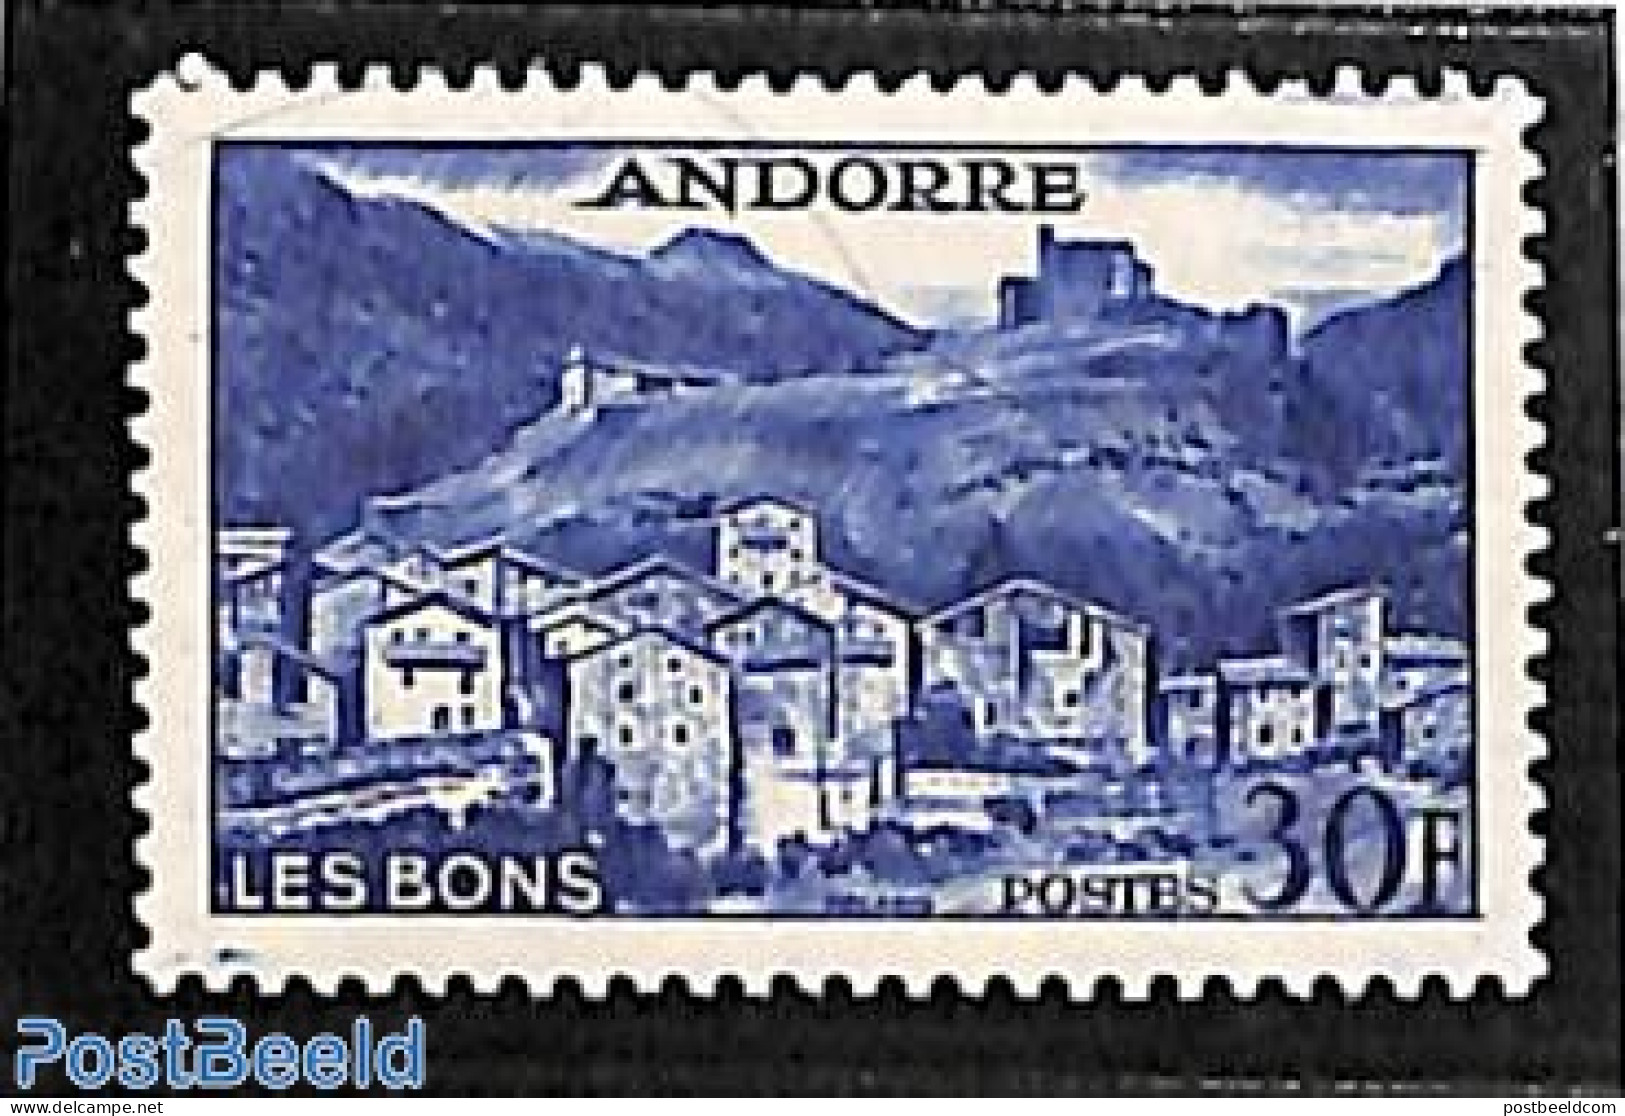 Andorra, French Post 1955 30f, Stamp Out Of Set, Mint NH - Neufs